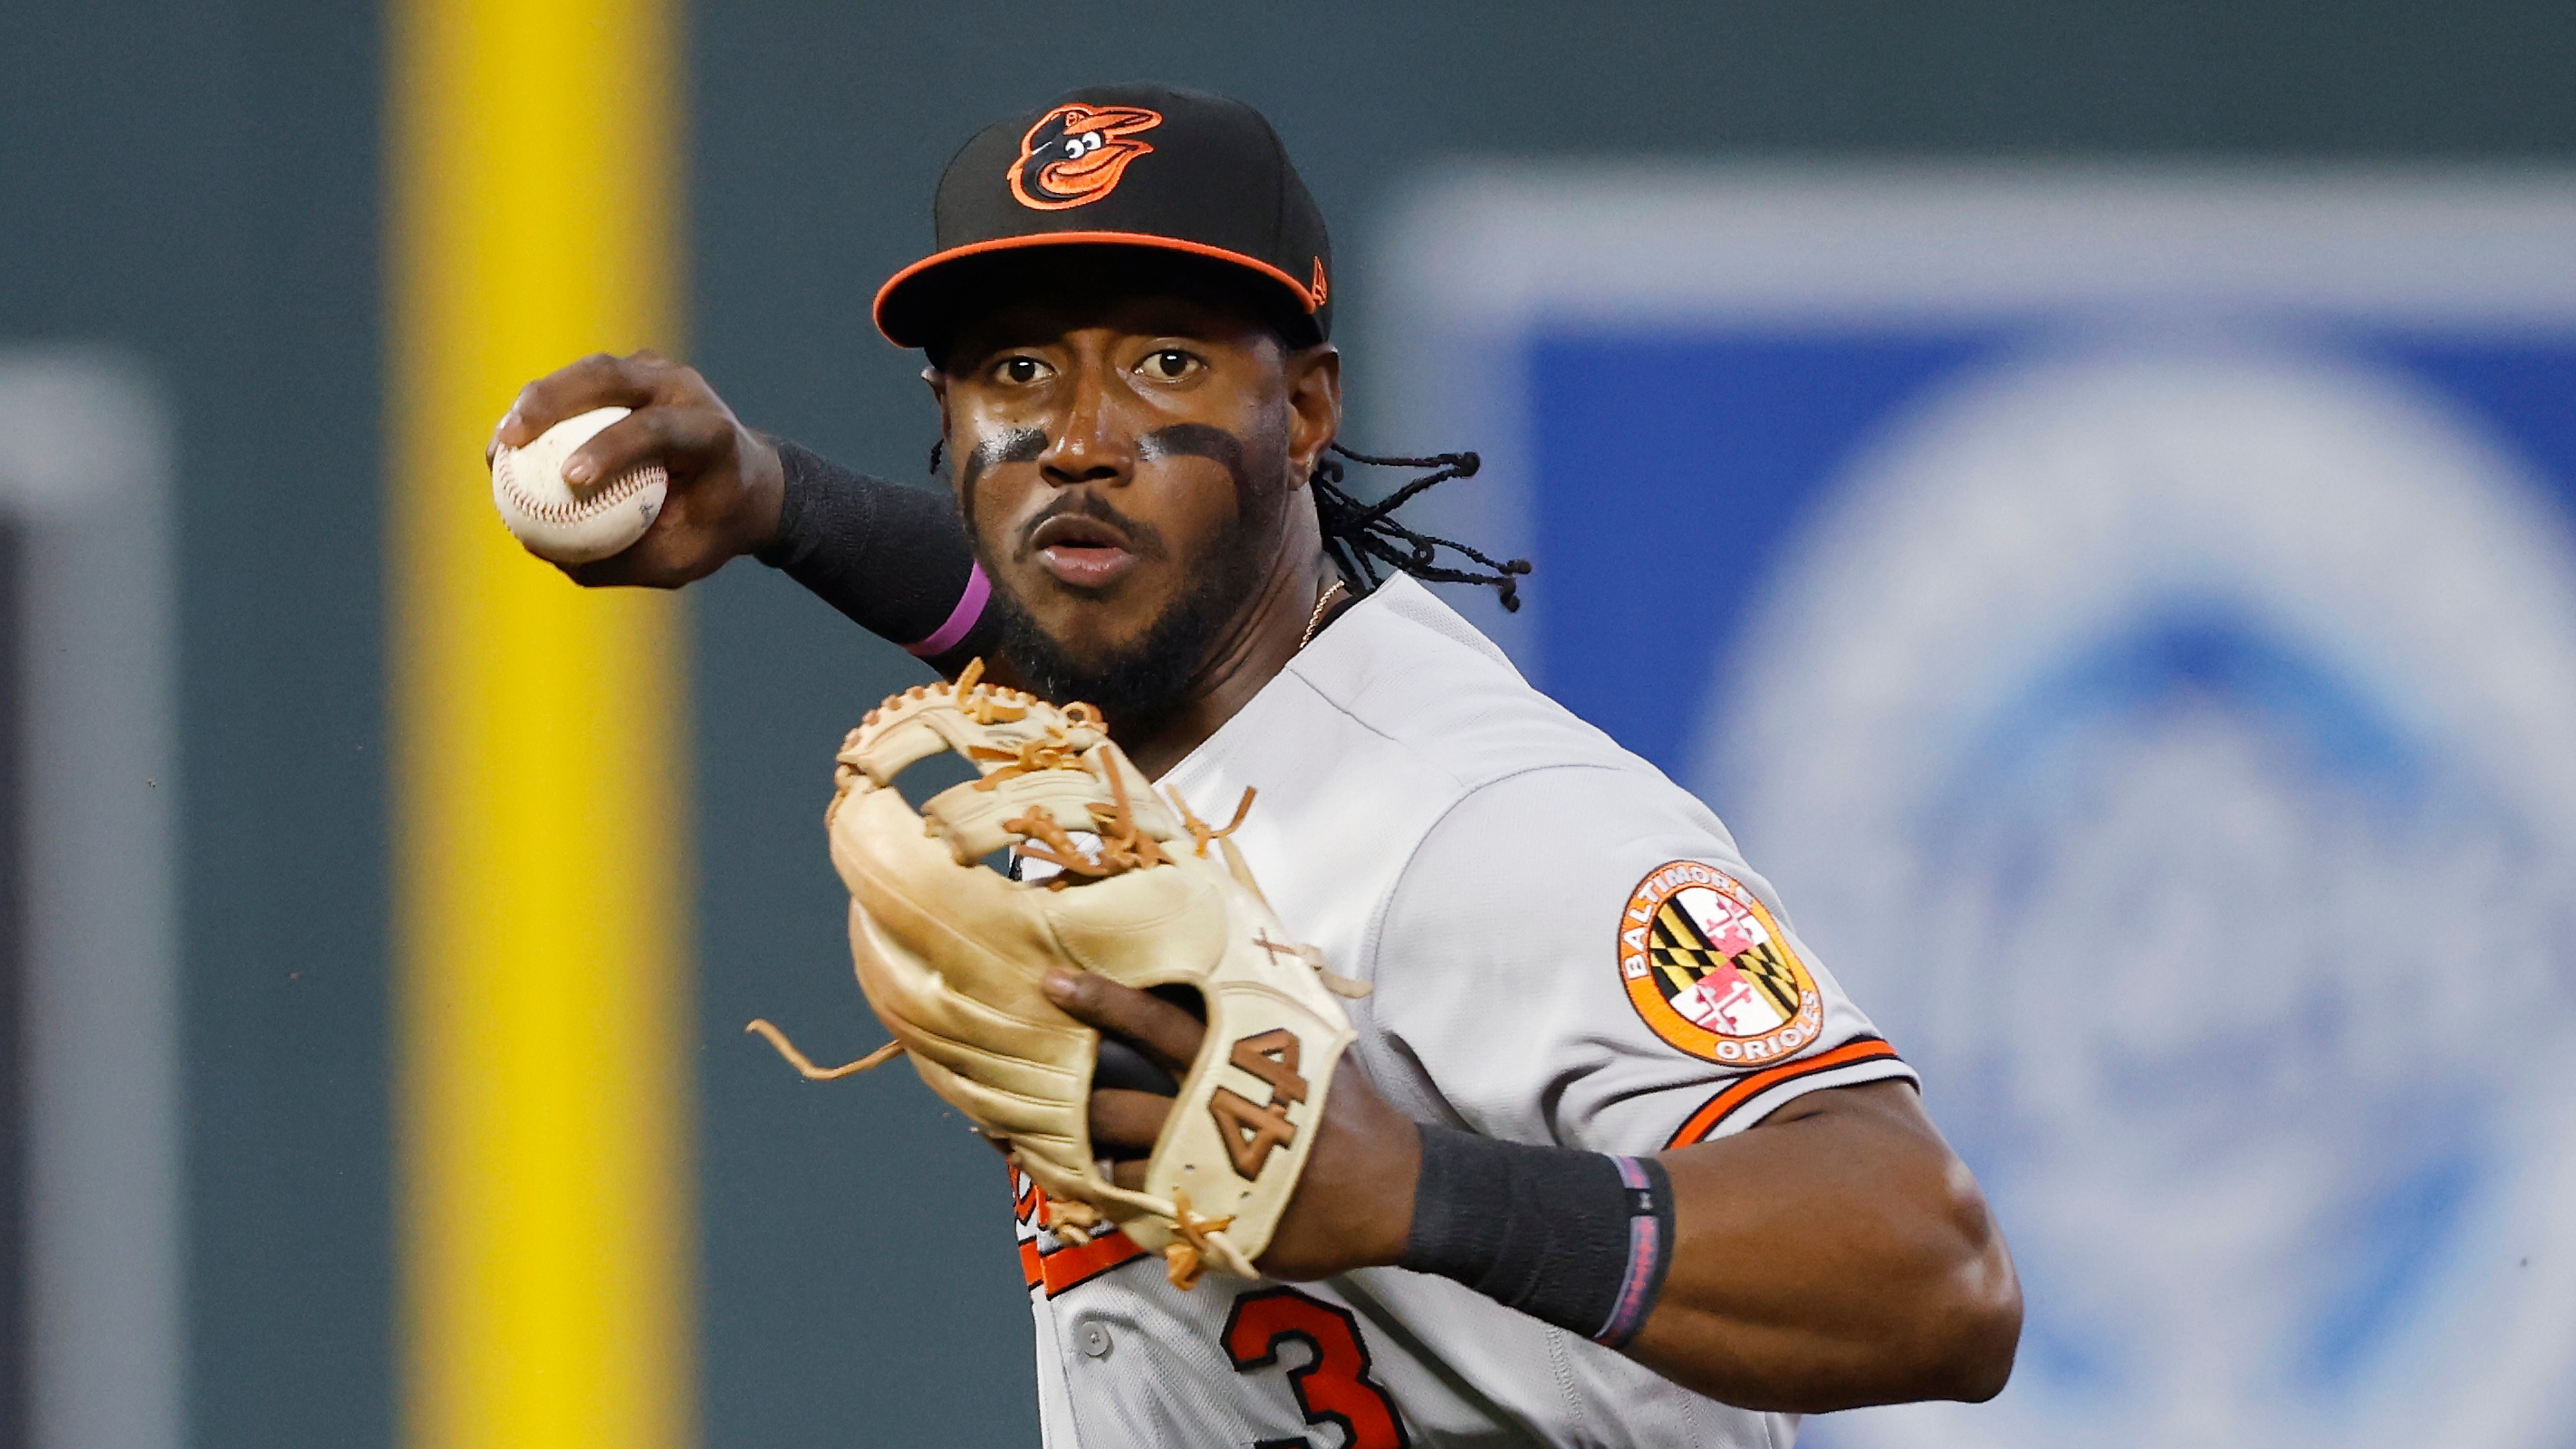 Jorge Mateo has offered excitement in his Orioles' debut - Camden Chat